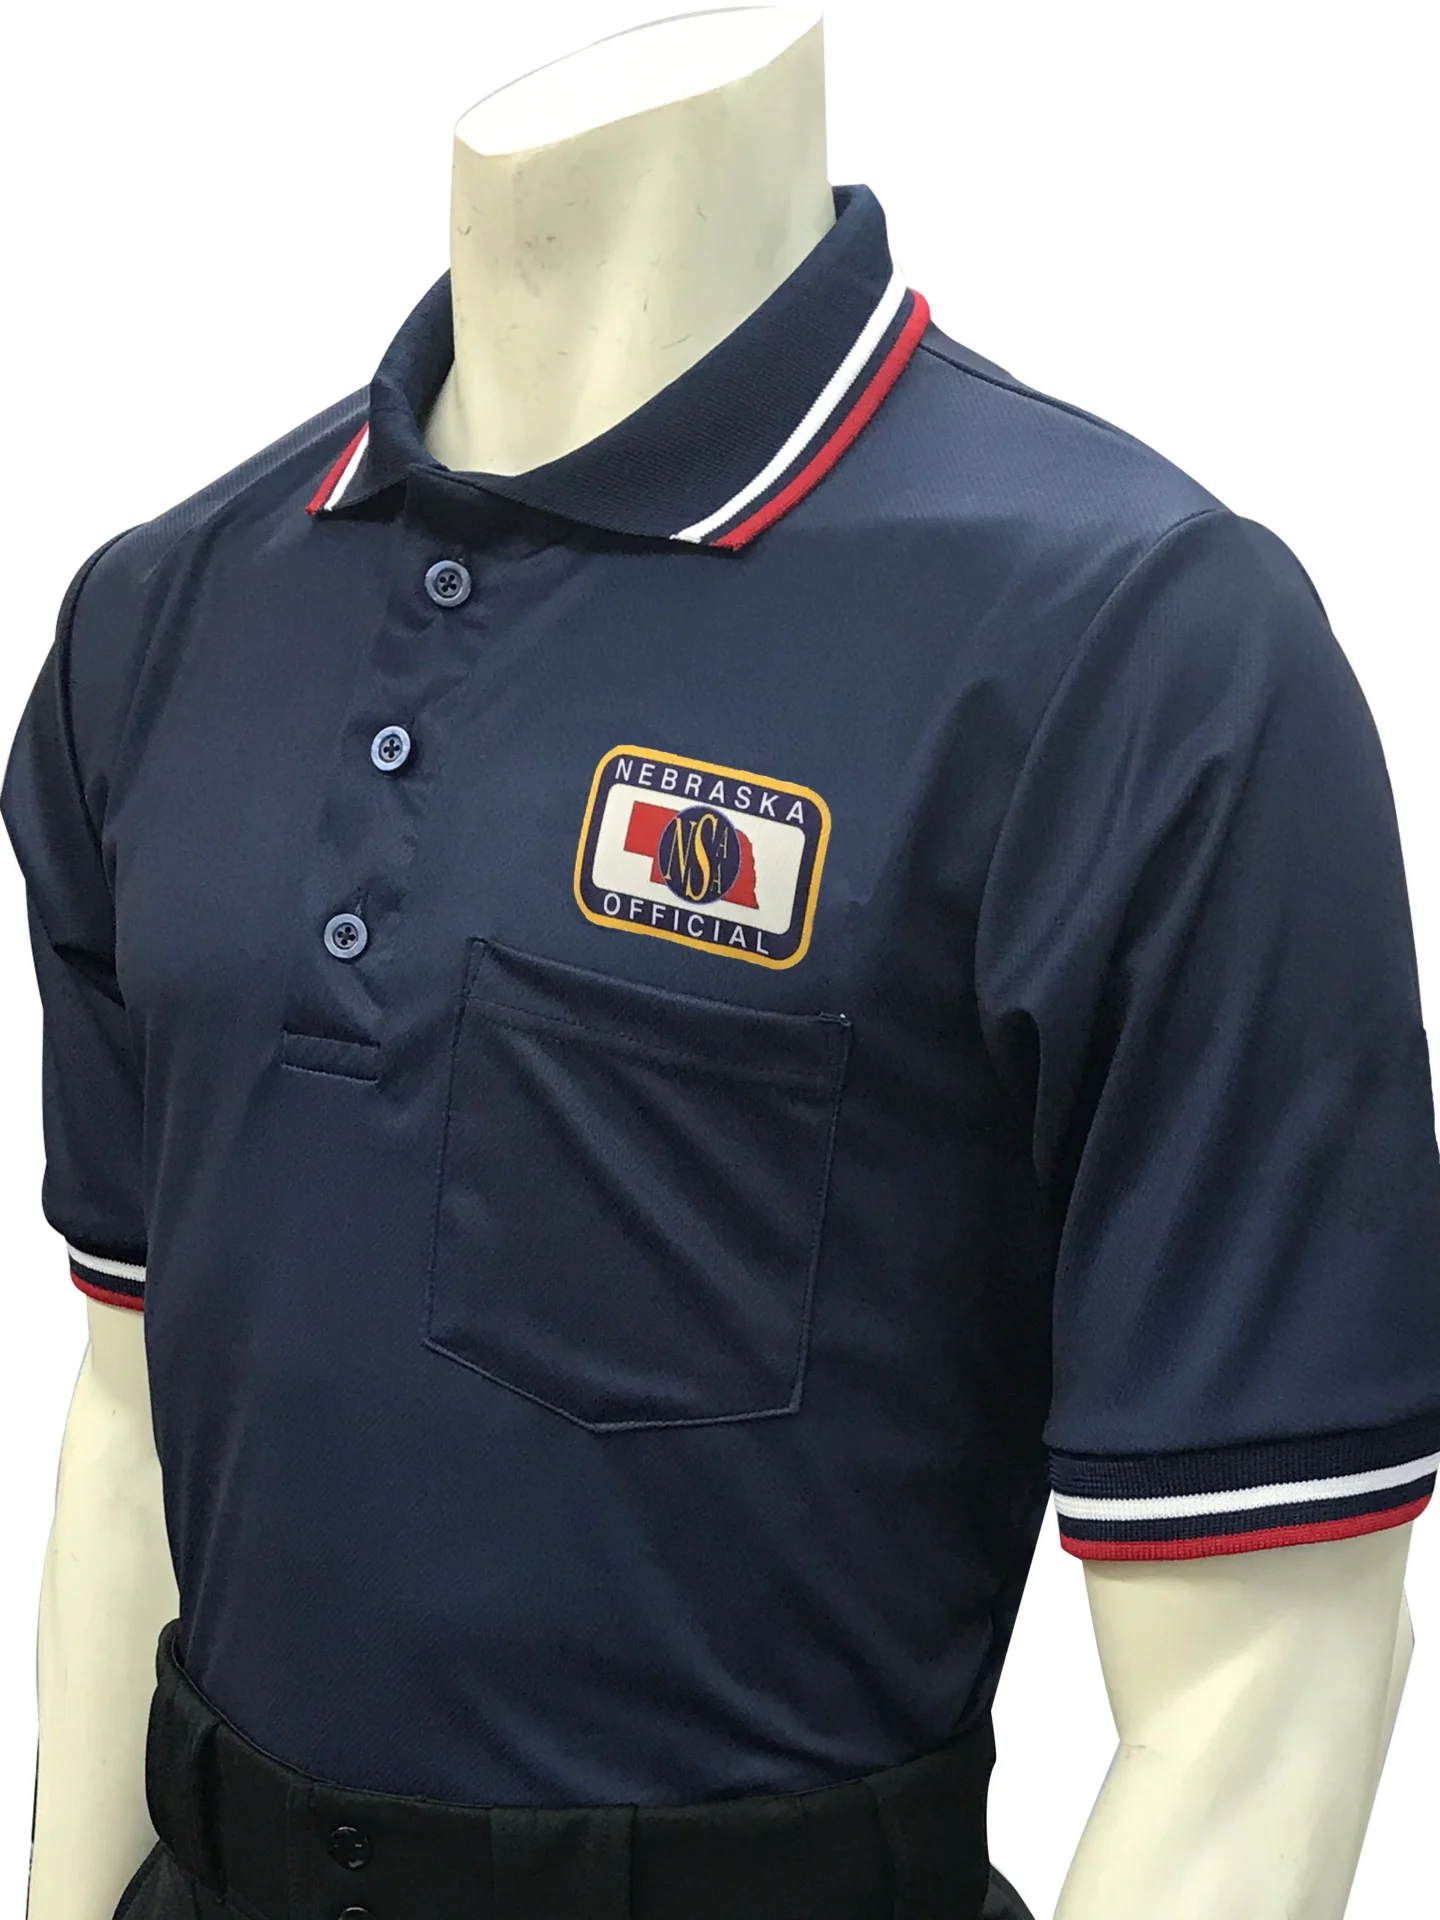 A referee shirt with the name of the team.